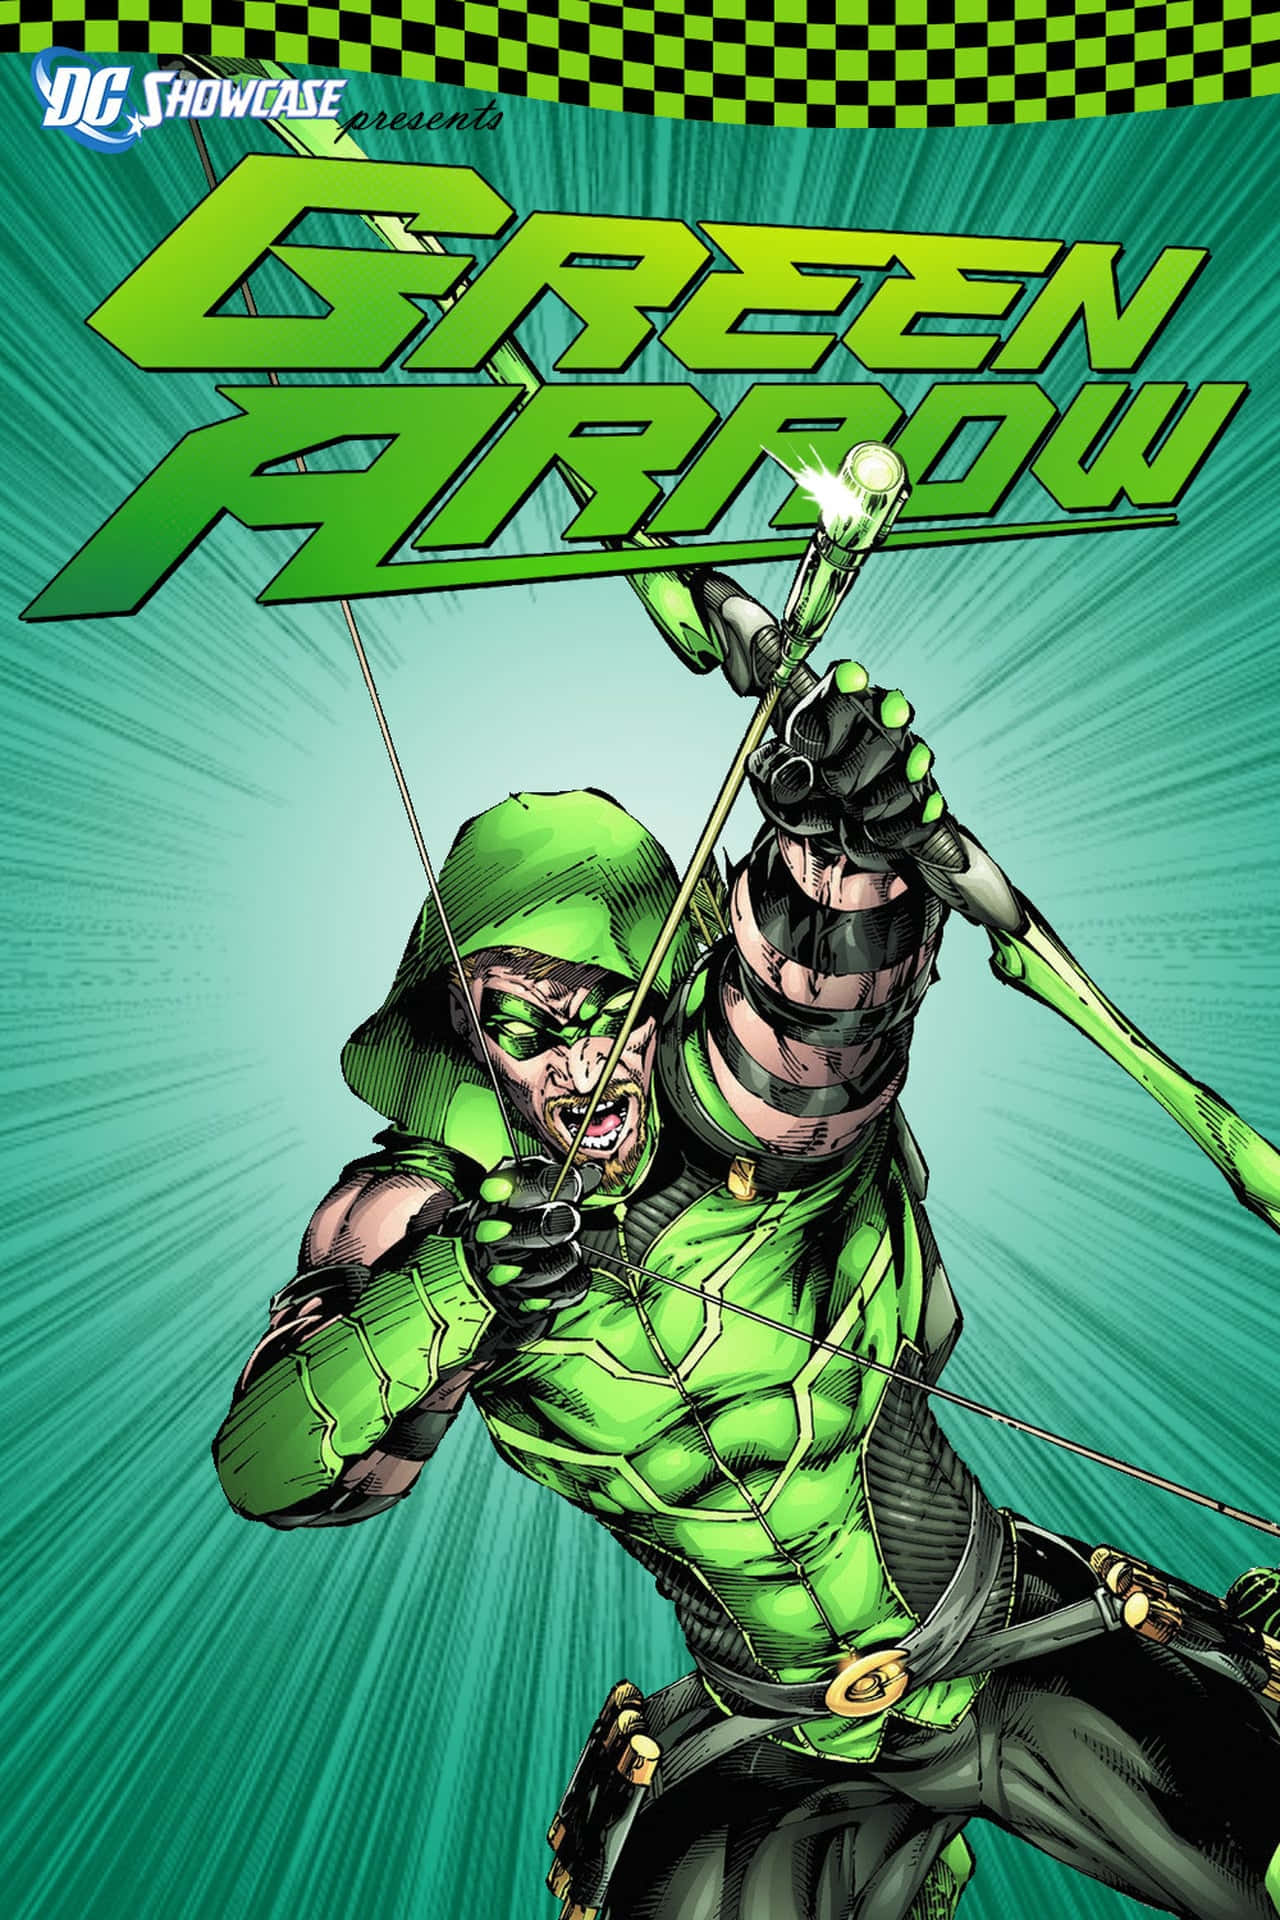 "Green Arrow: Ready for Action"